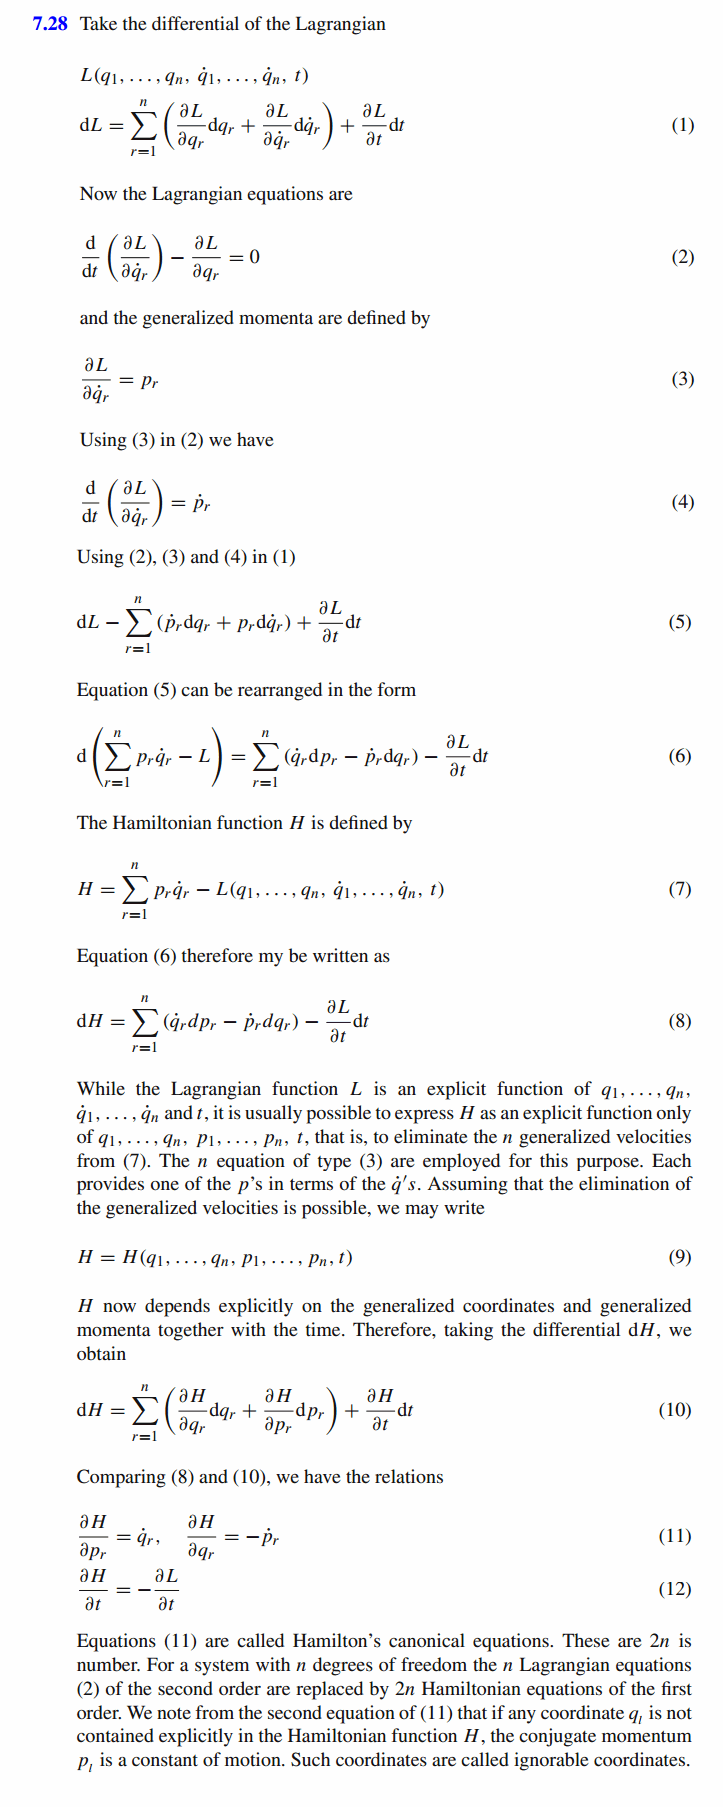 A system is described by the single (generalized) coordinate q  and the Lagrangi